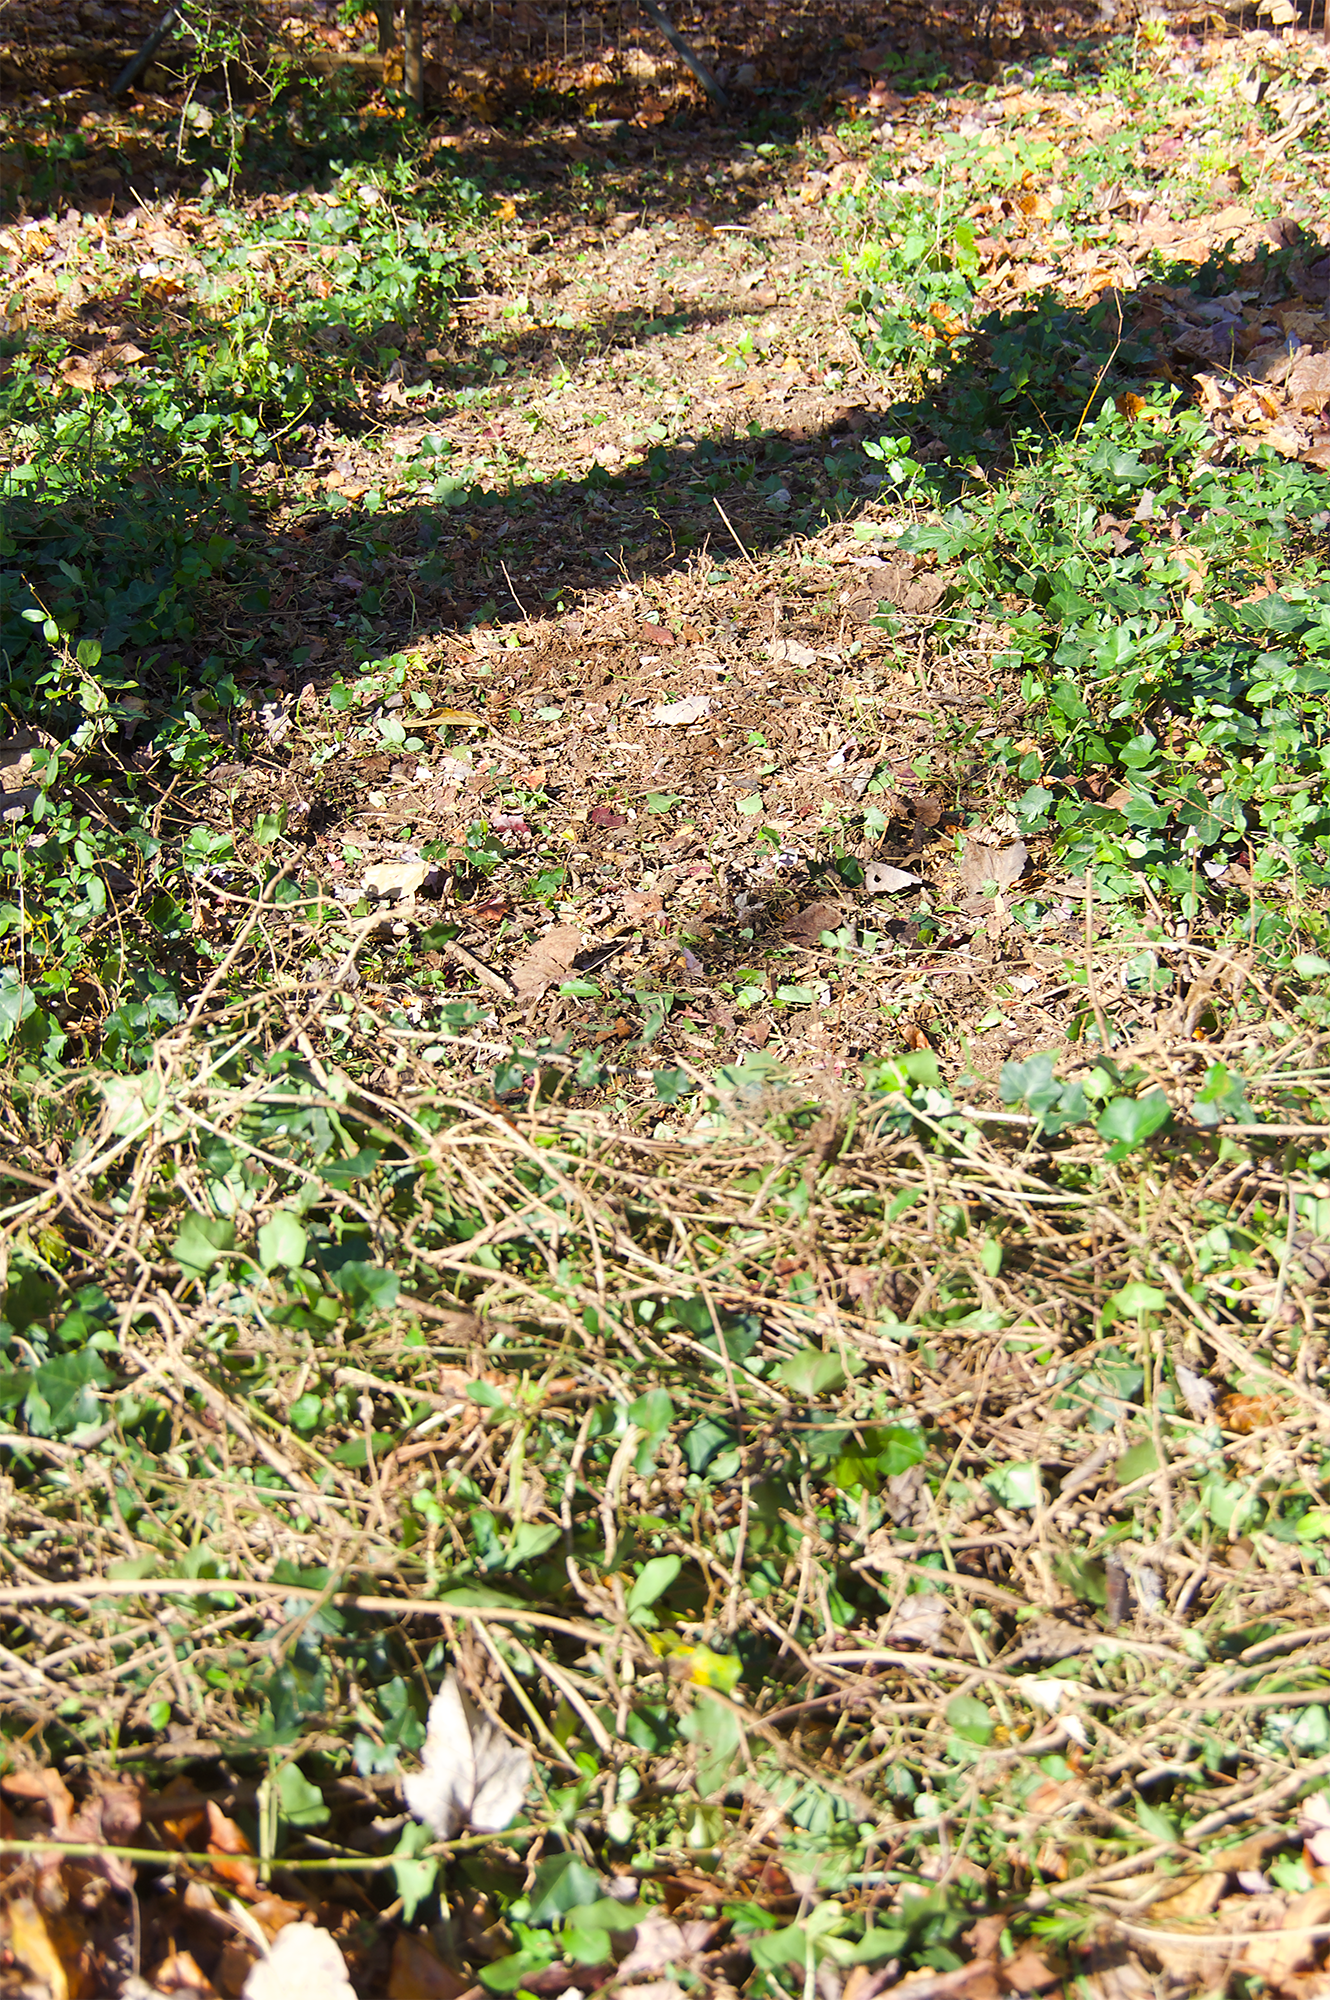 Strip, 4 by 20 feet, cleared of ivy